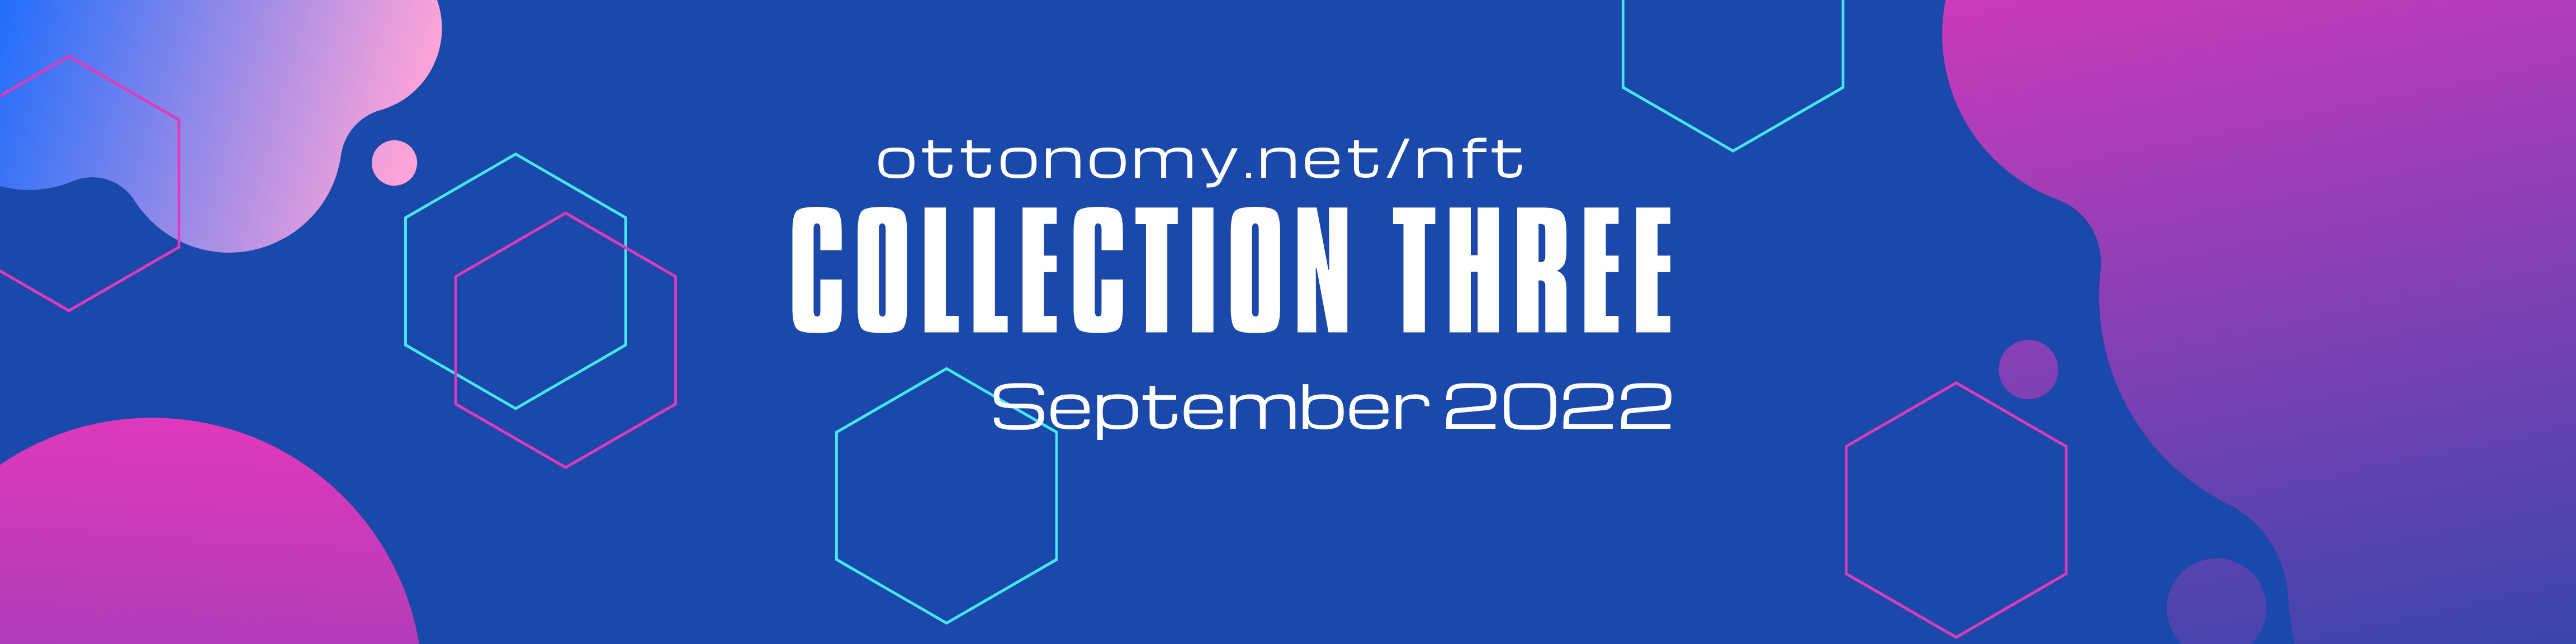 NFT collection three coming September 2022